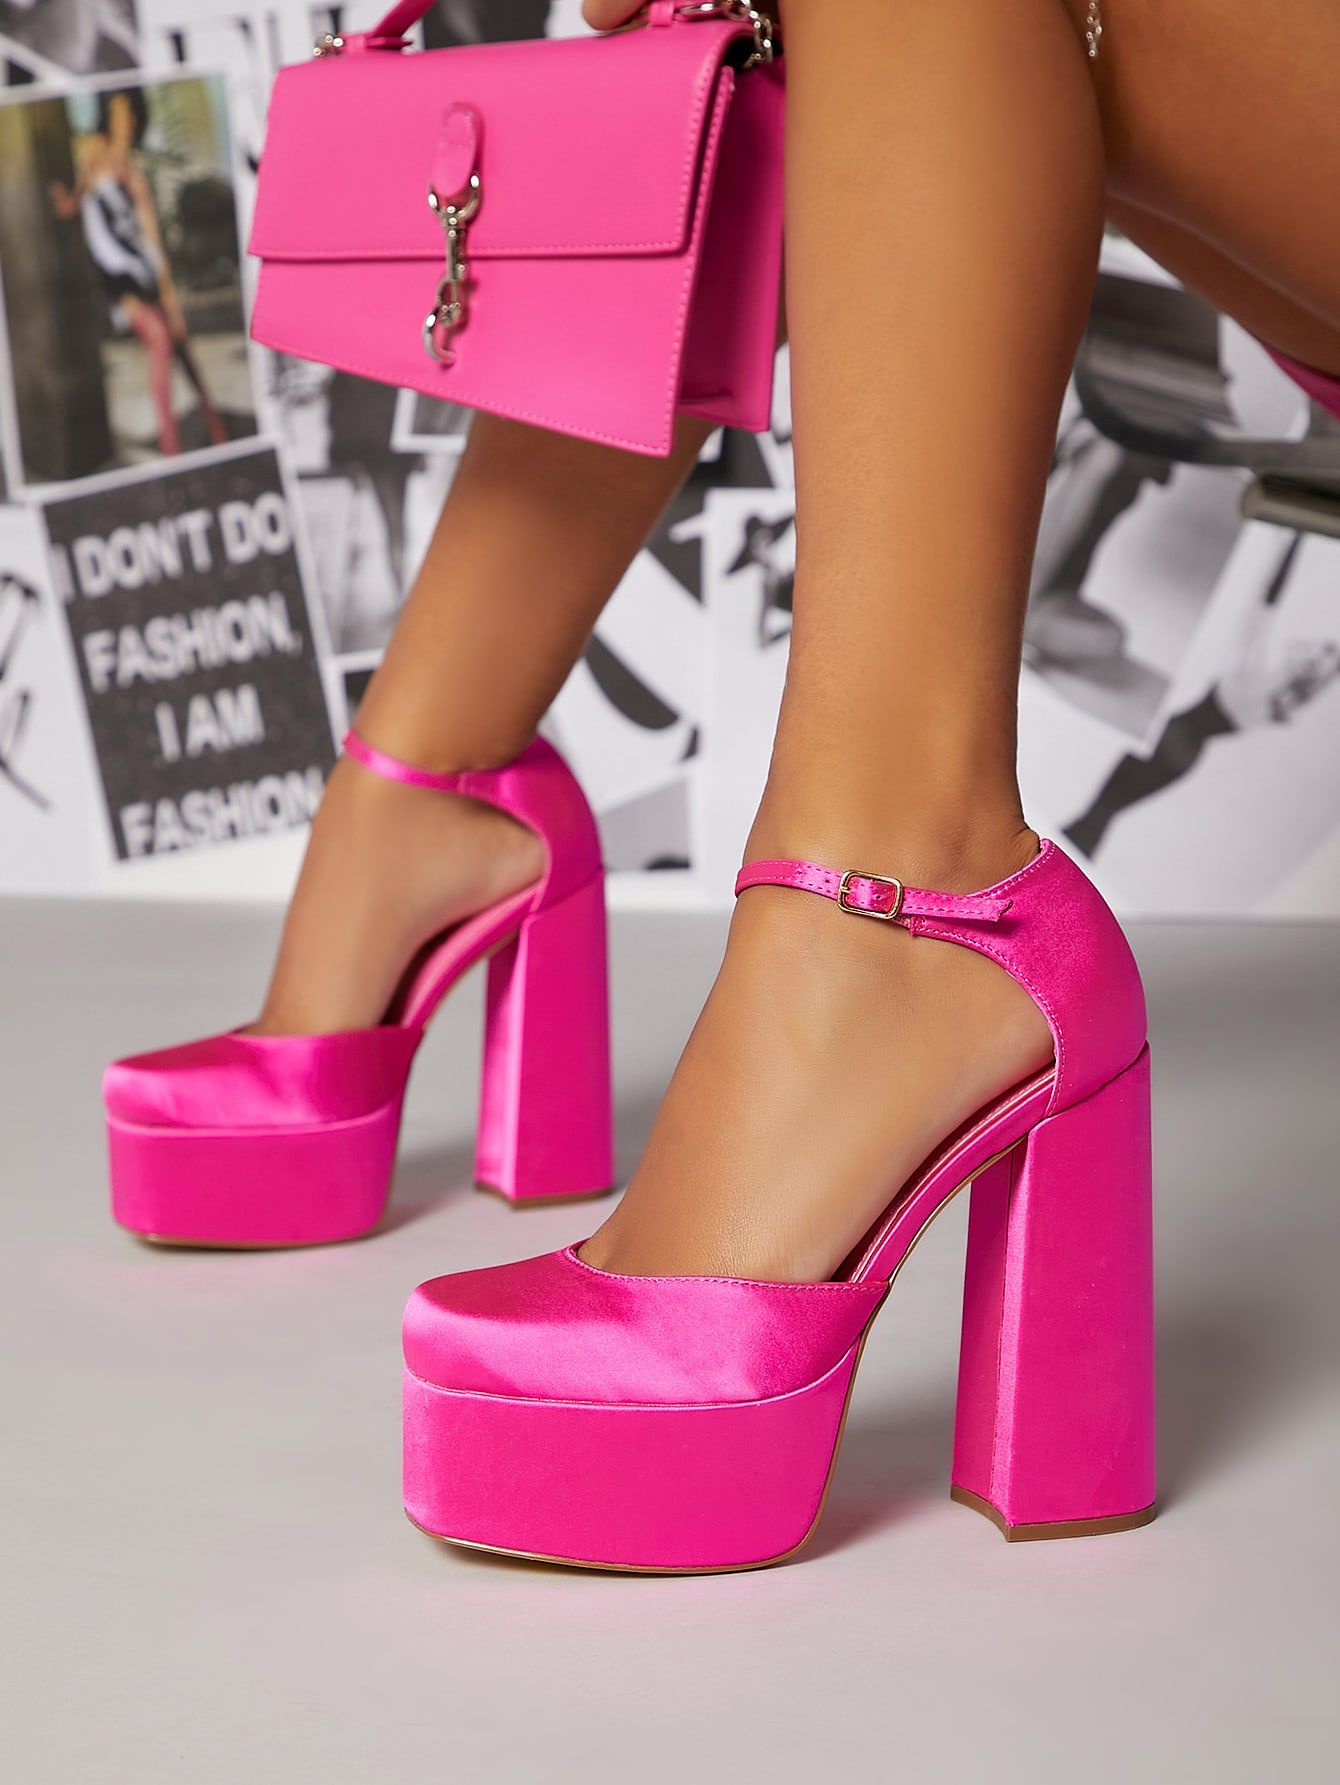 How to Style Hot Pink Heels: Top 15 Ladylike & Attractive Outfit Ideas for Ladies